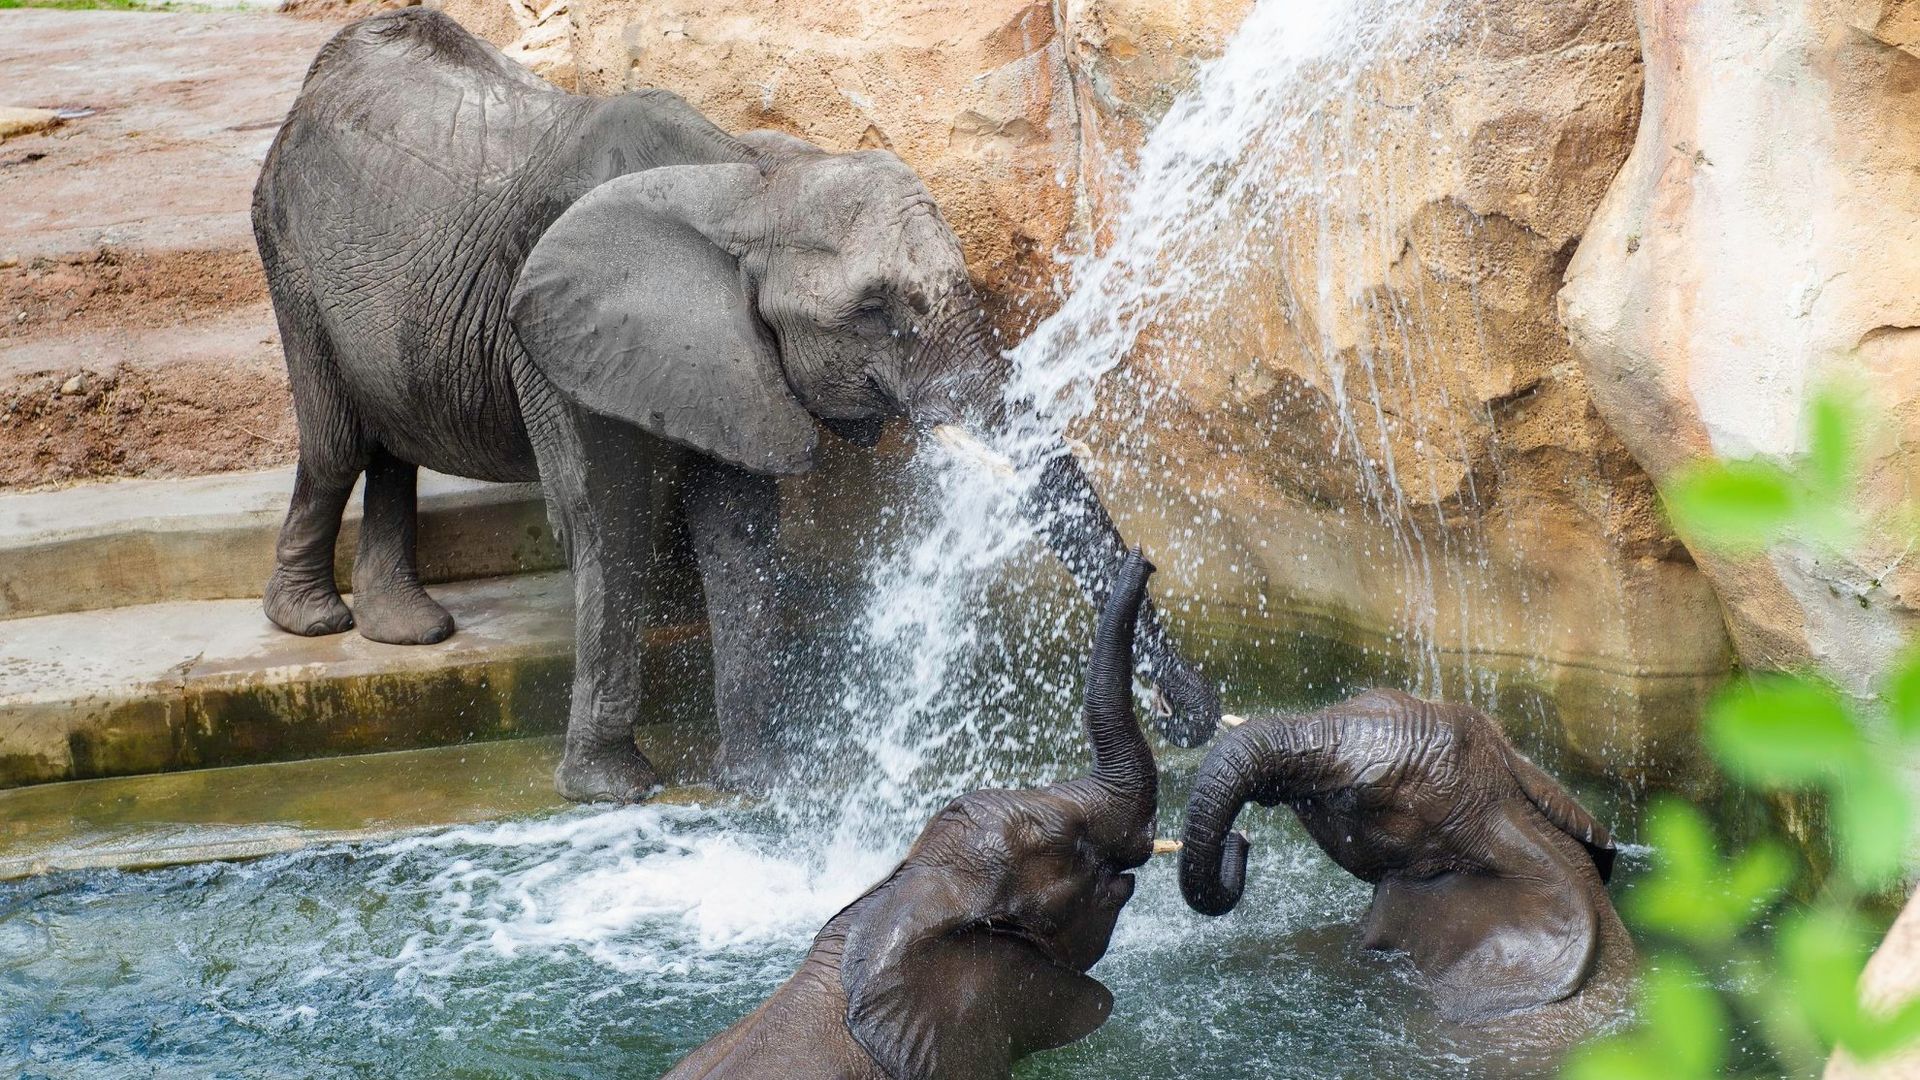 Three African elephants play in a pool of water. Two splash in the water while one stands on steps nearby with its trunk in a little waterfall